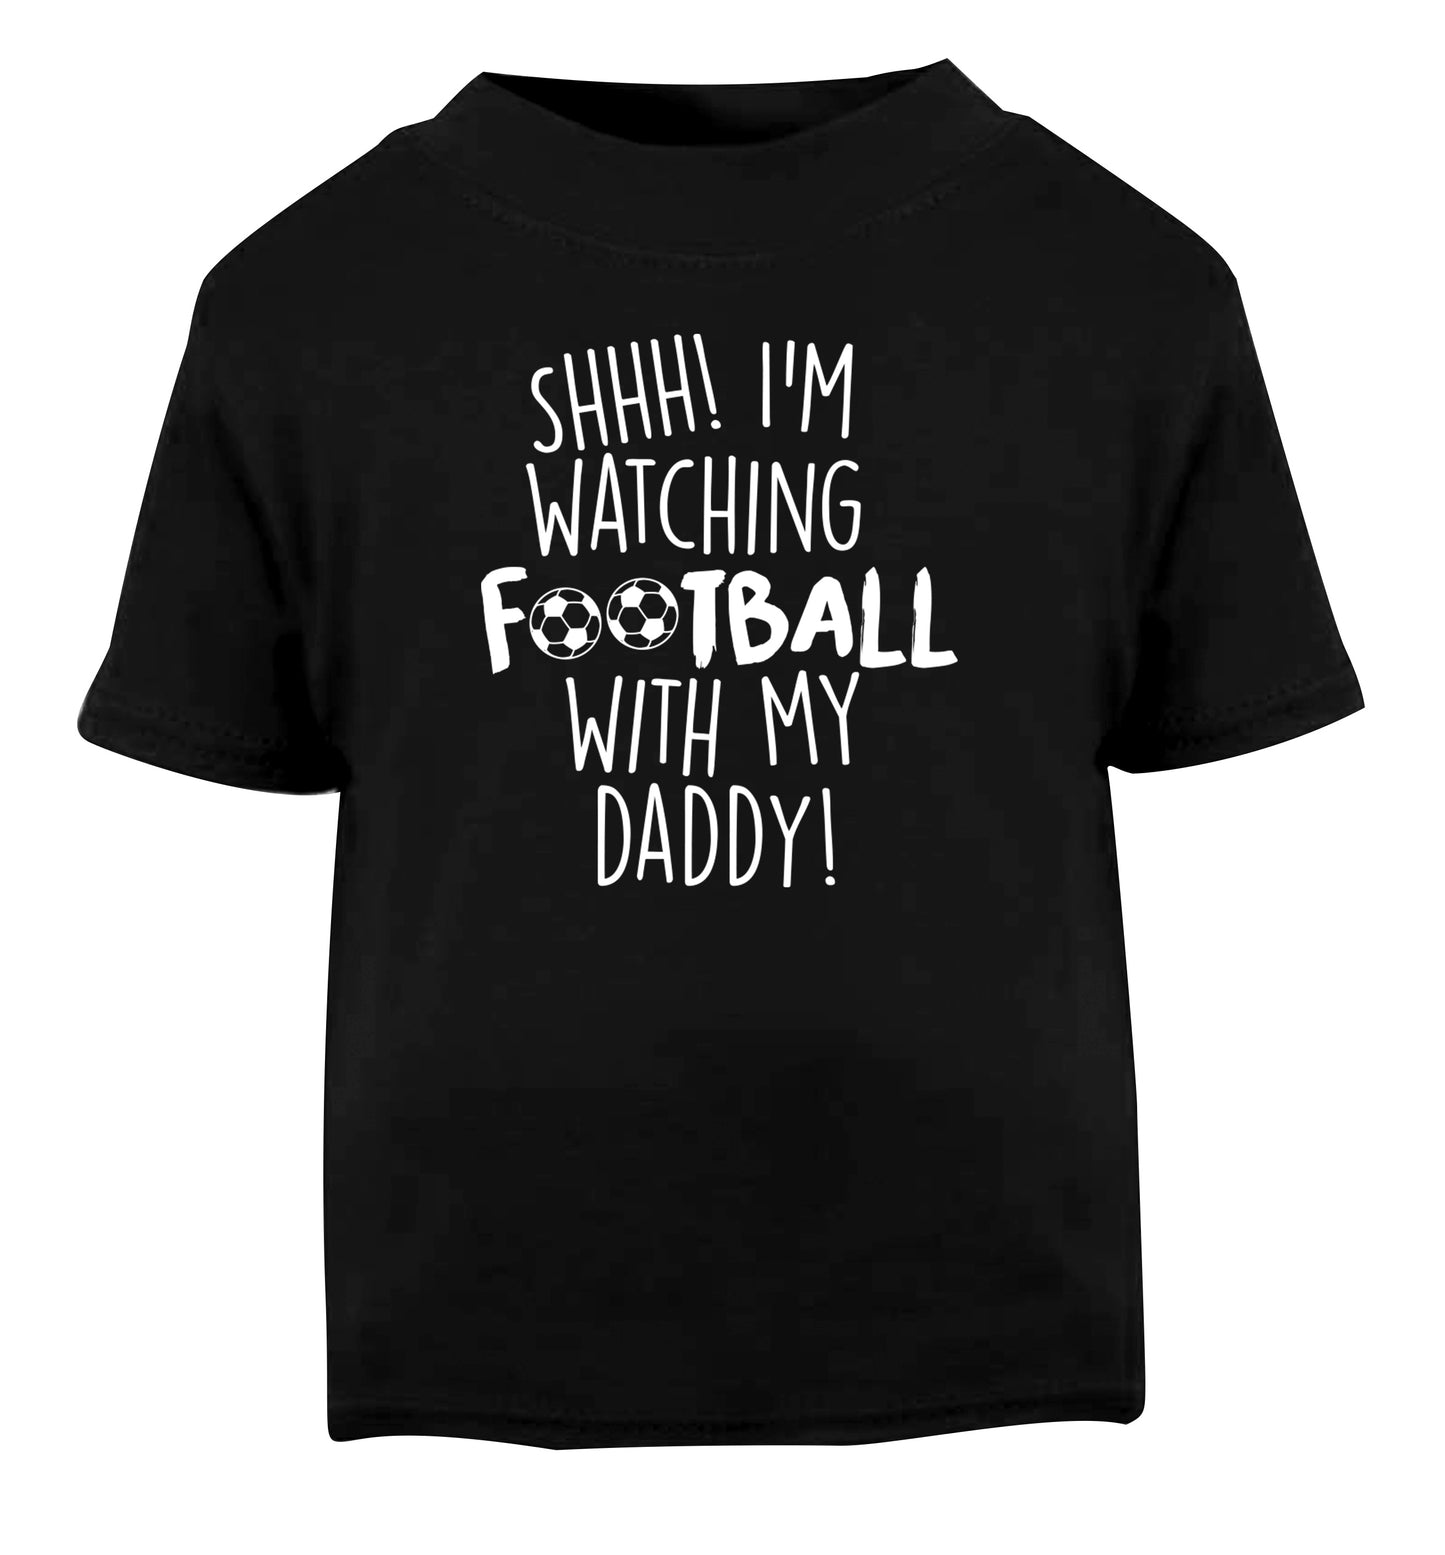 Shhh I'm watching football with my daddy Black Baby Toddler Tshirt 2 years